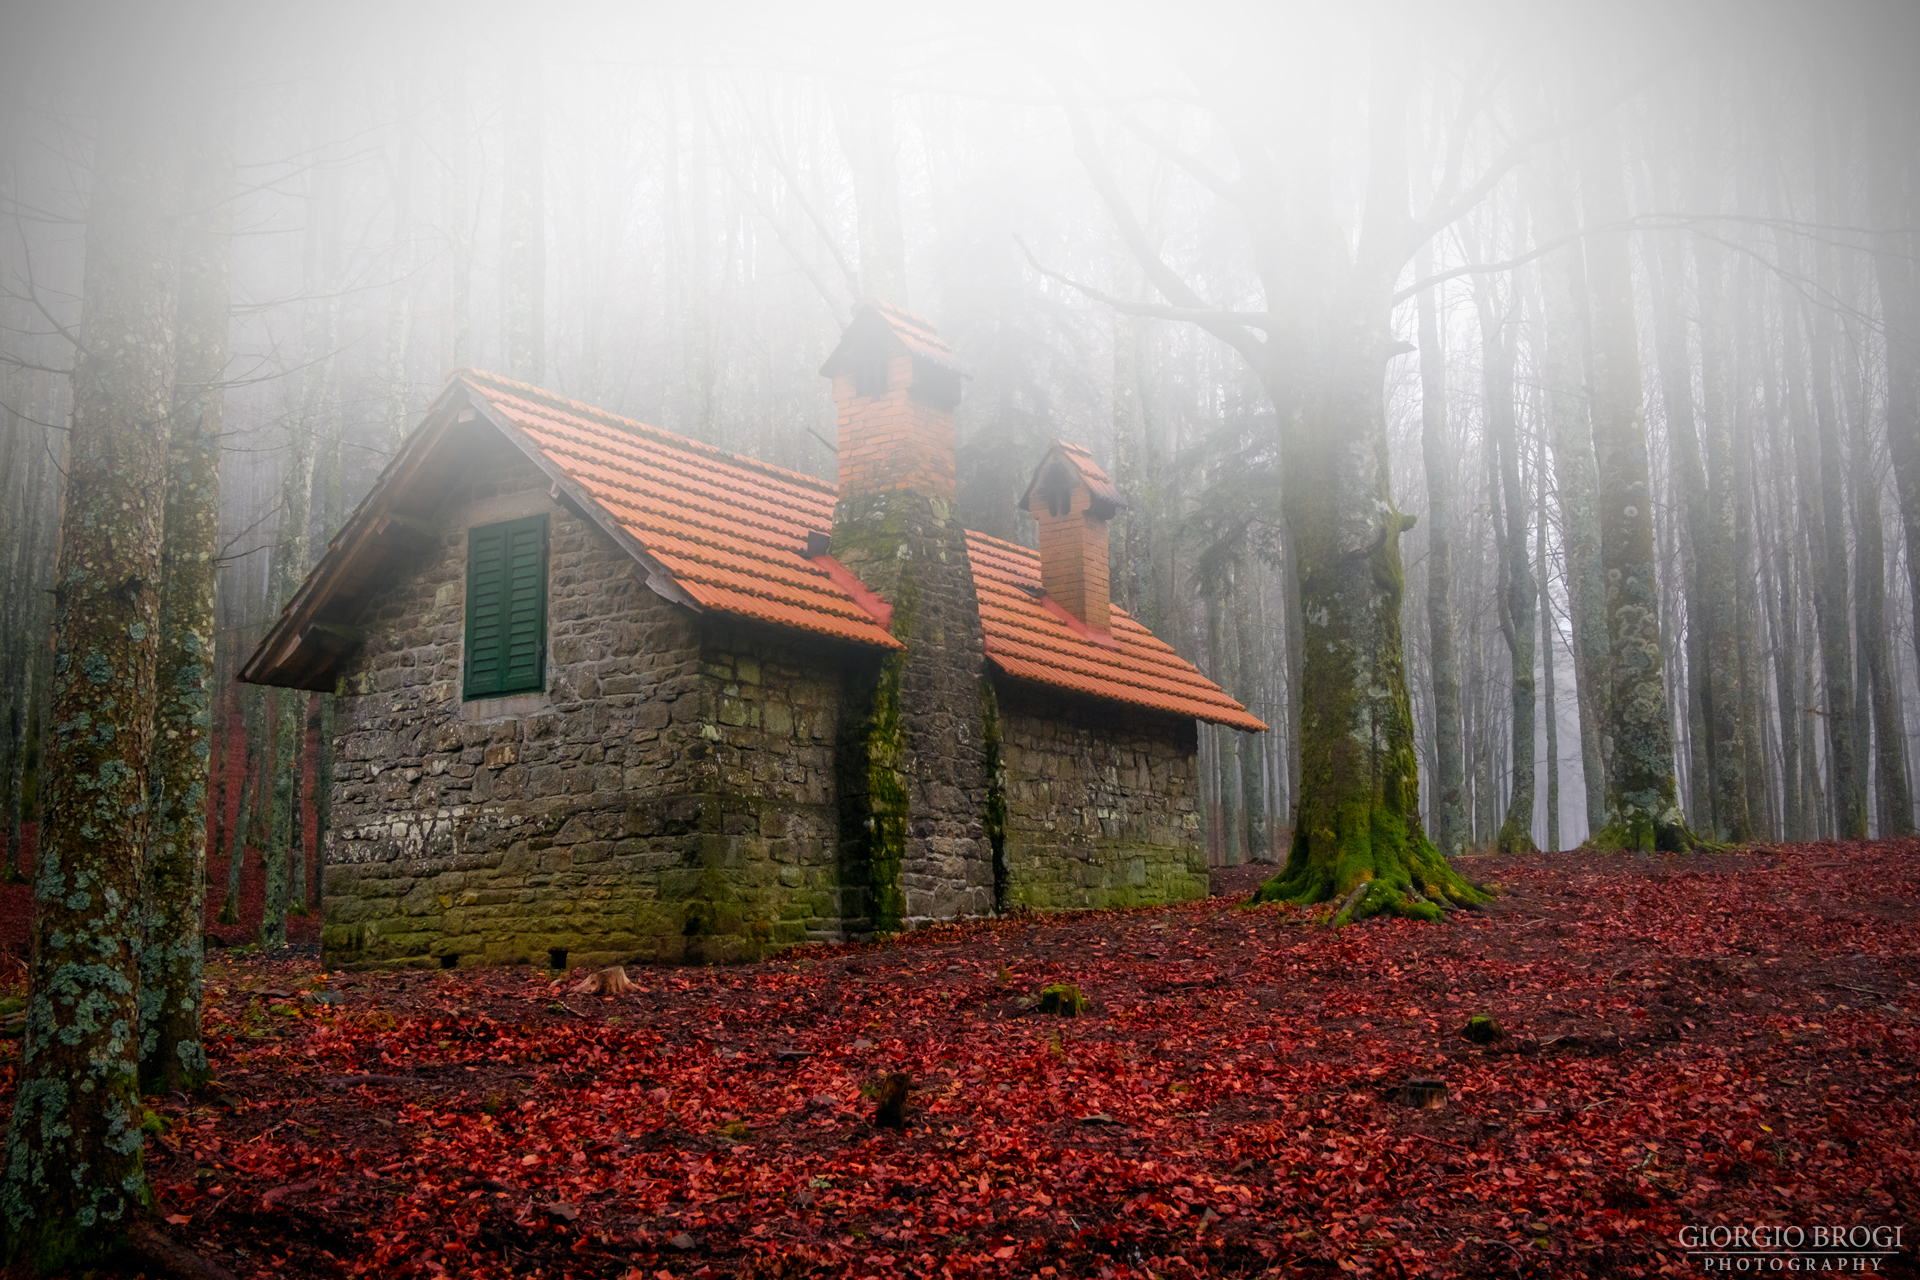 The Little House in the Fog...